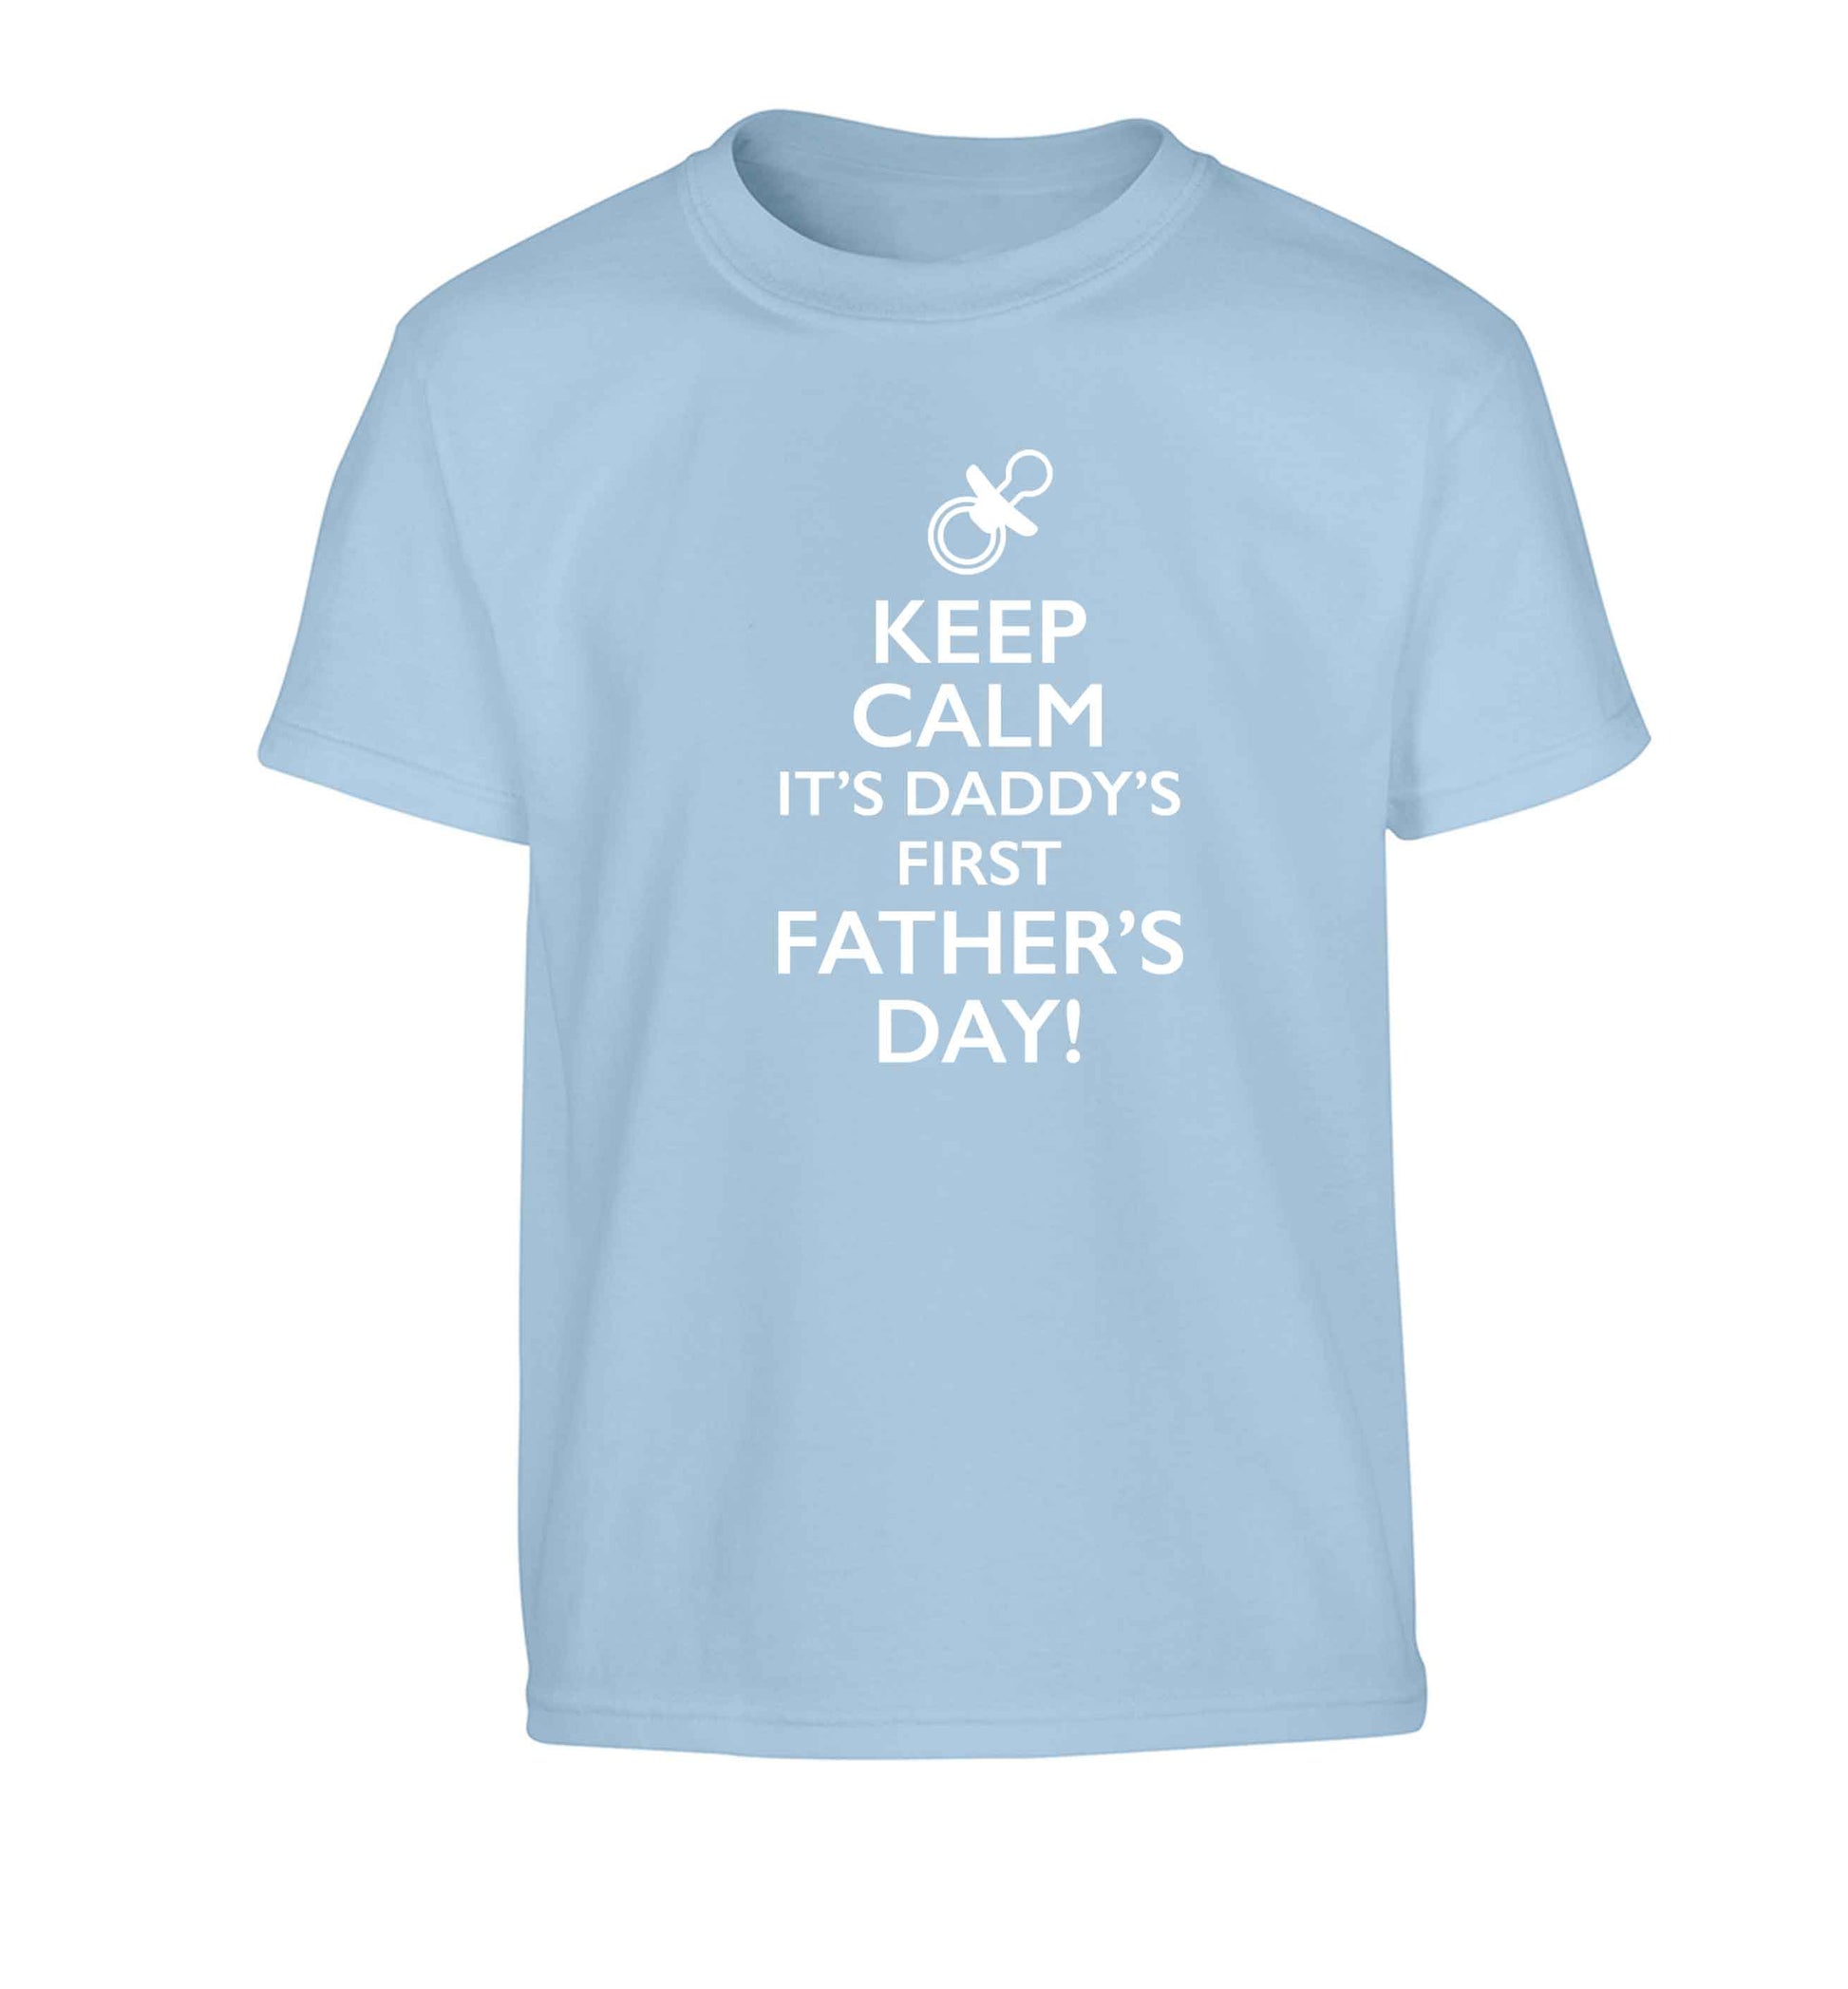 Keep calm it's daddys first father's day Children's light blue Tshirt 12-13 Years